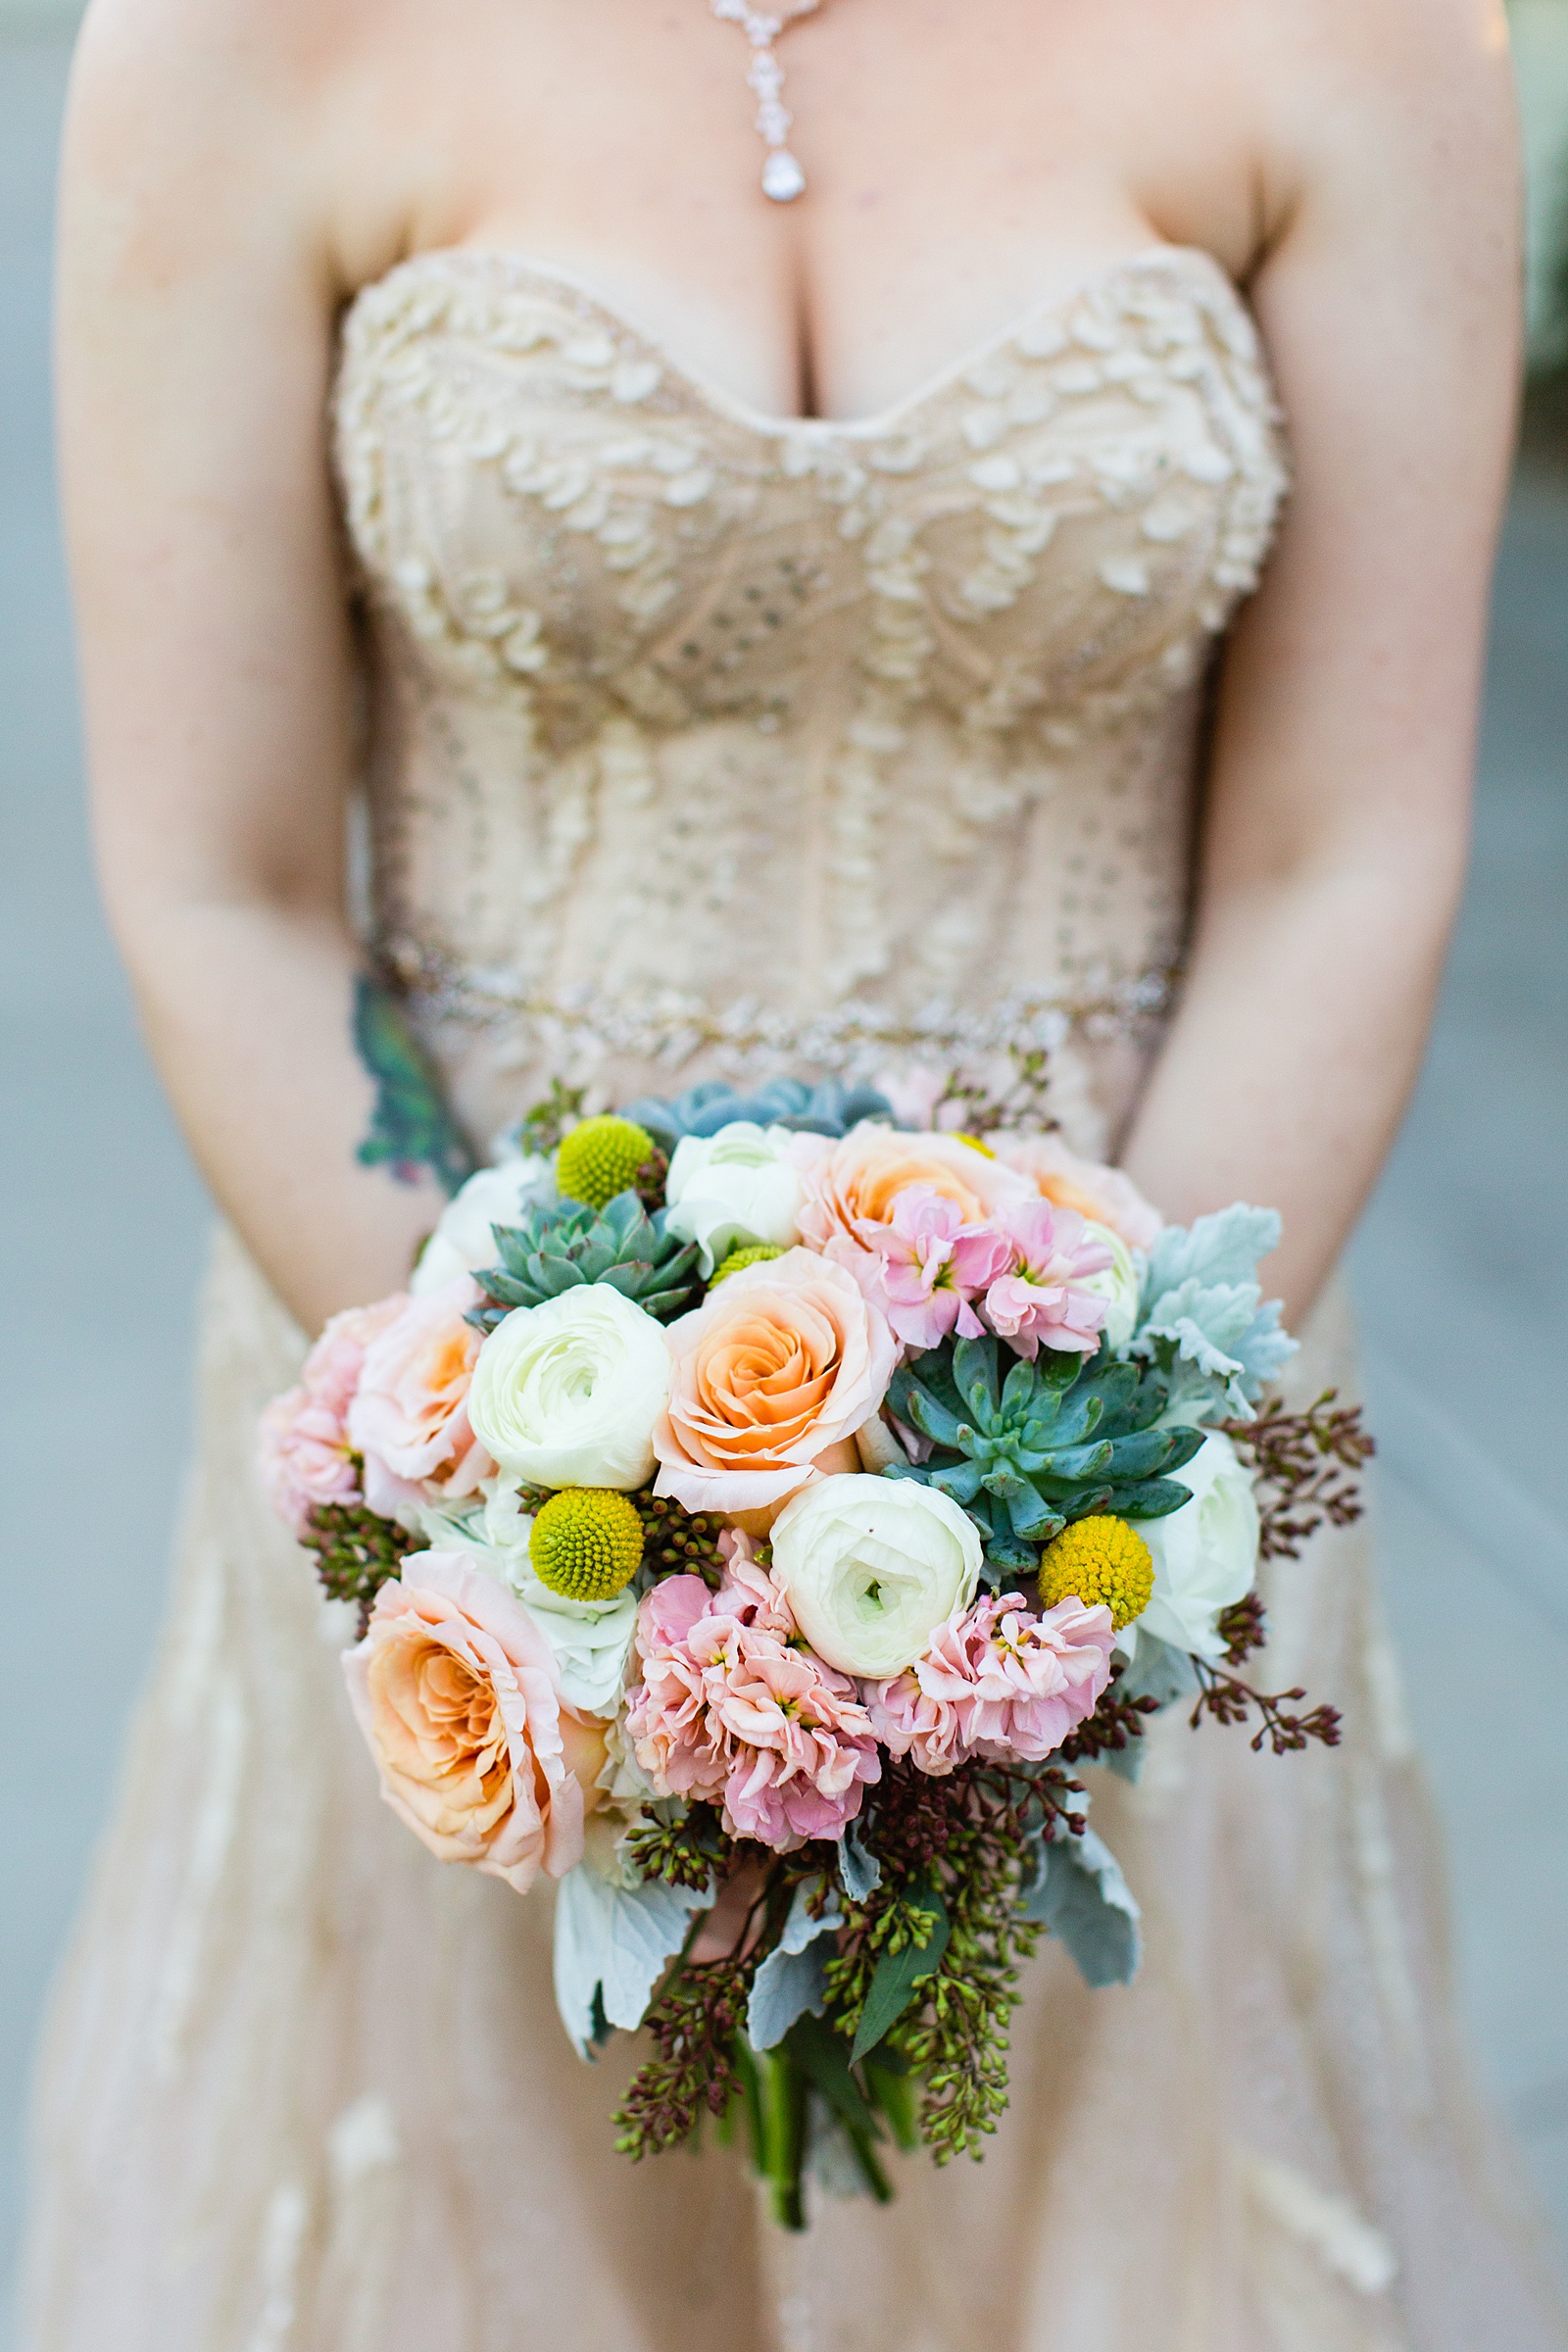 Bride's colorful garden bouquet with succulents and roses by PMA Photography.